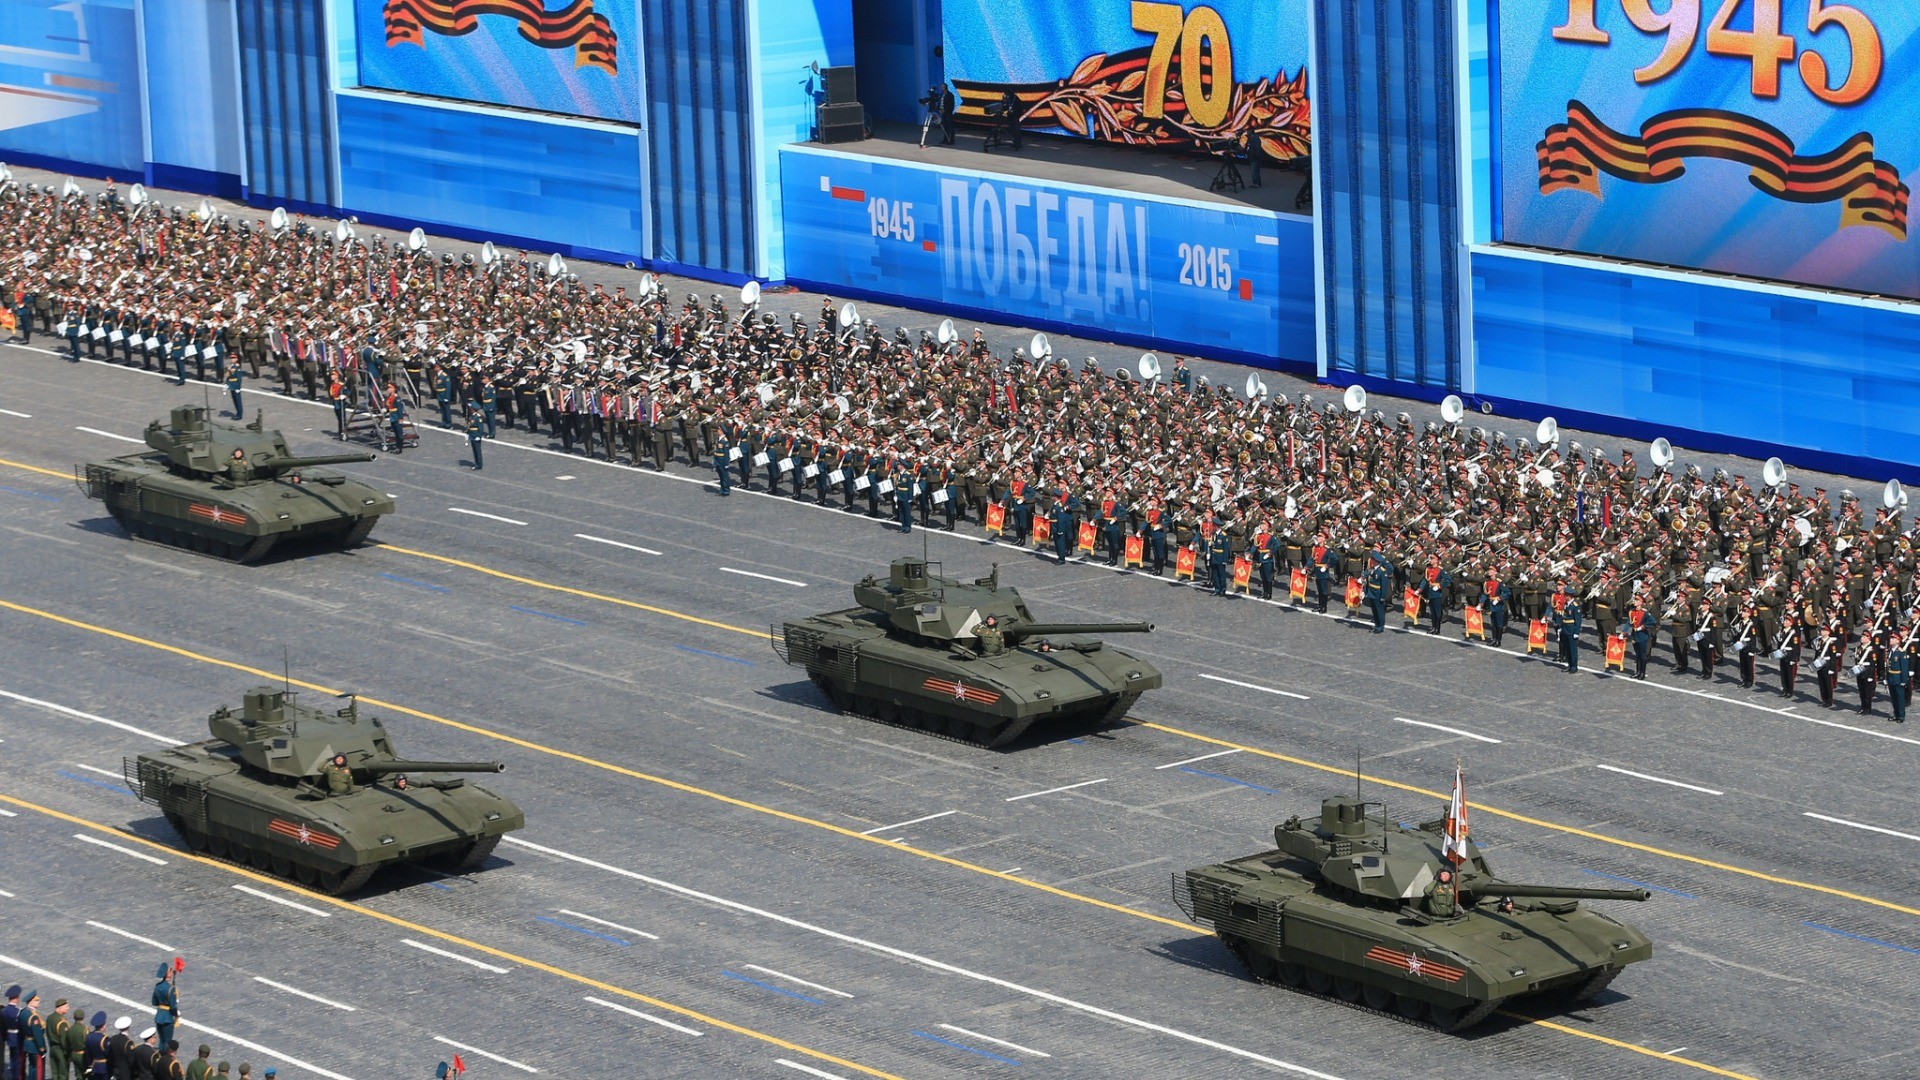 General 1920x1080 military Victory Day Moscow Russia tank military vehicle parade T 14 Armata Russian Army Red Square 2015 (Year) Russian/Soviet tanks